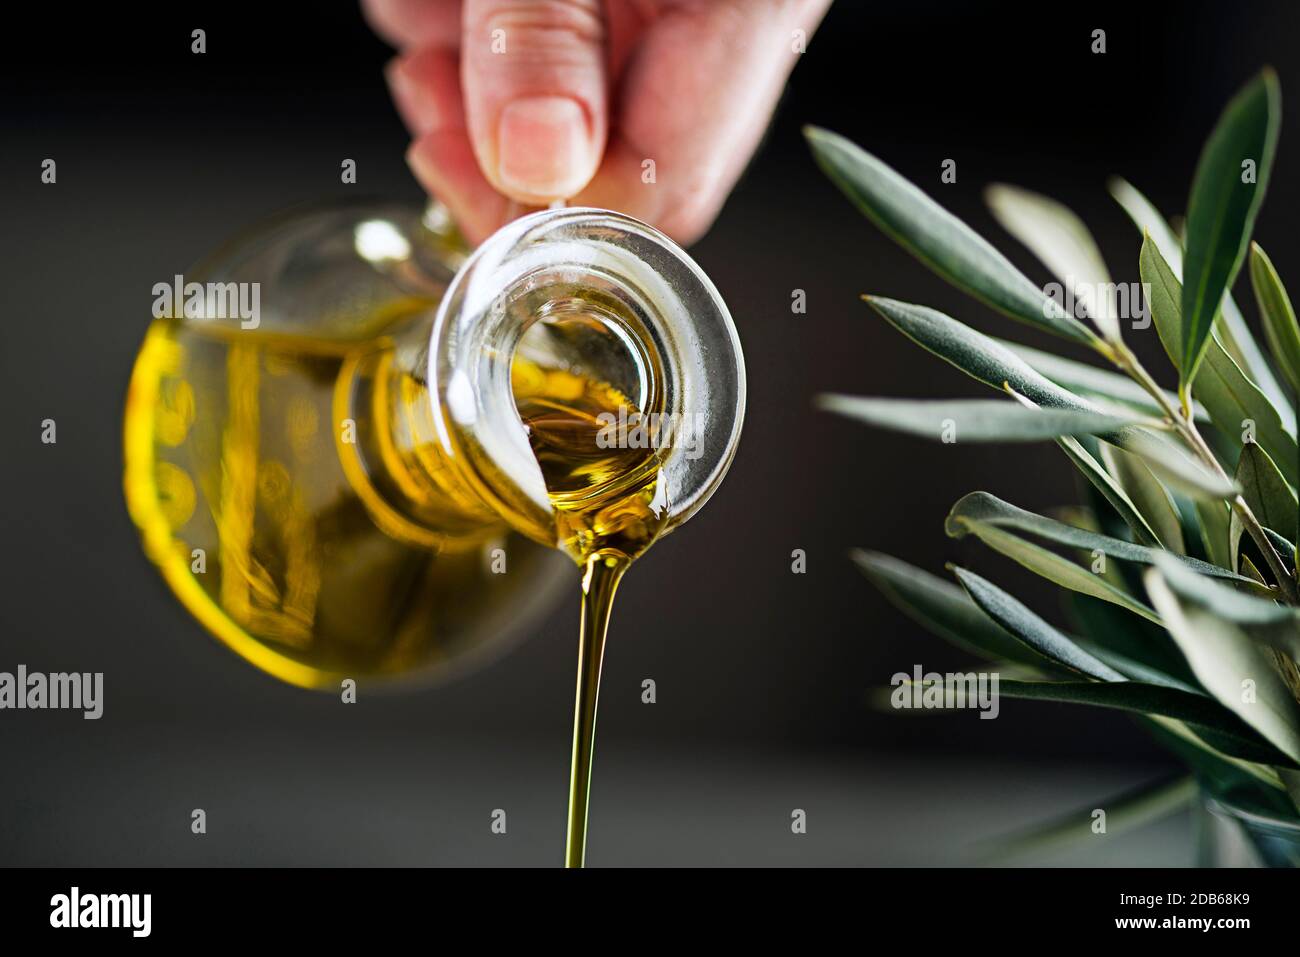 Bottle of Extra virgin olive oil pouring on dark background. Healthy food concept. Stock Photo